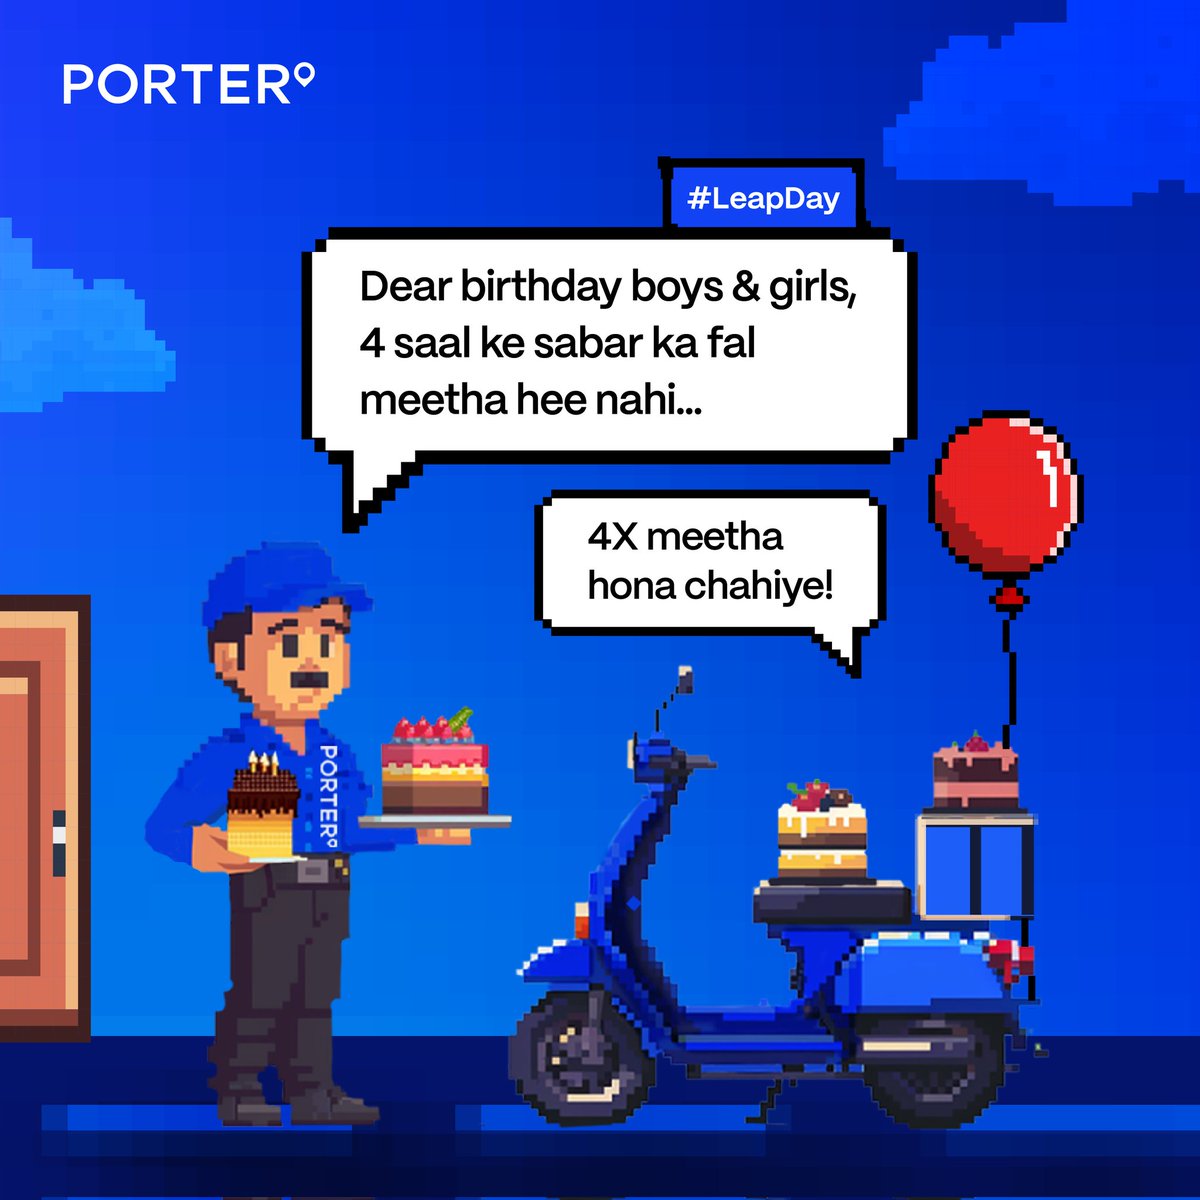 Is it your birthday today? Then comment below! One lucky person might just get a birthday surprise from us🥳

#DeliveredWithLove #Porter #DeliveryHai #HoJayega #LeapDay #leapyear #leapday2024 #birthday